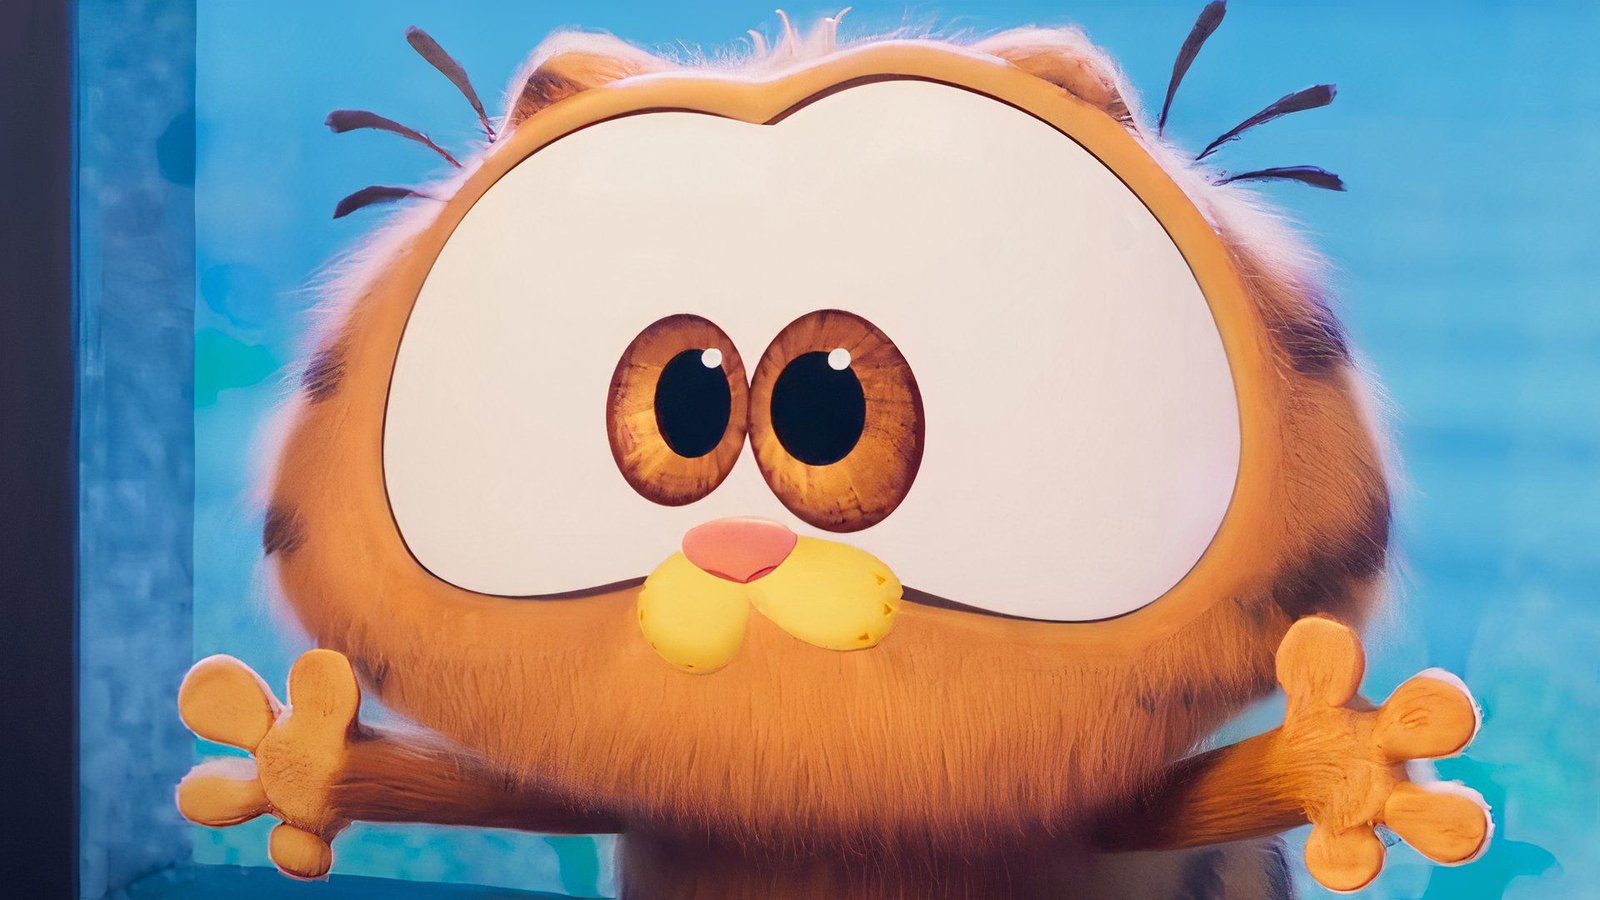 The Garfield Movie's Rotten Tomatoes Score Plummets Now That the Embargo Has Lifted in the U.S.